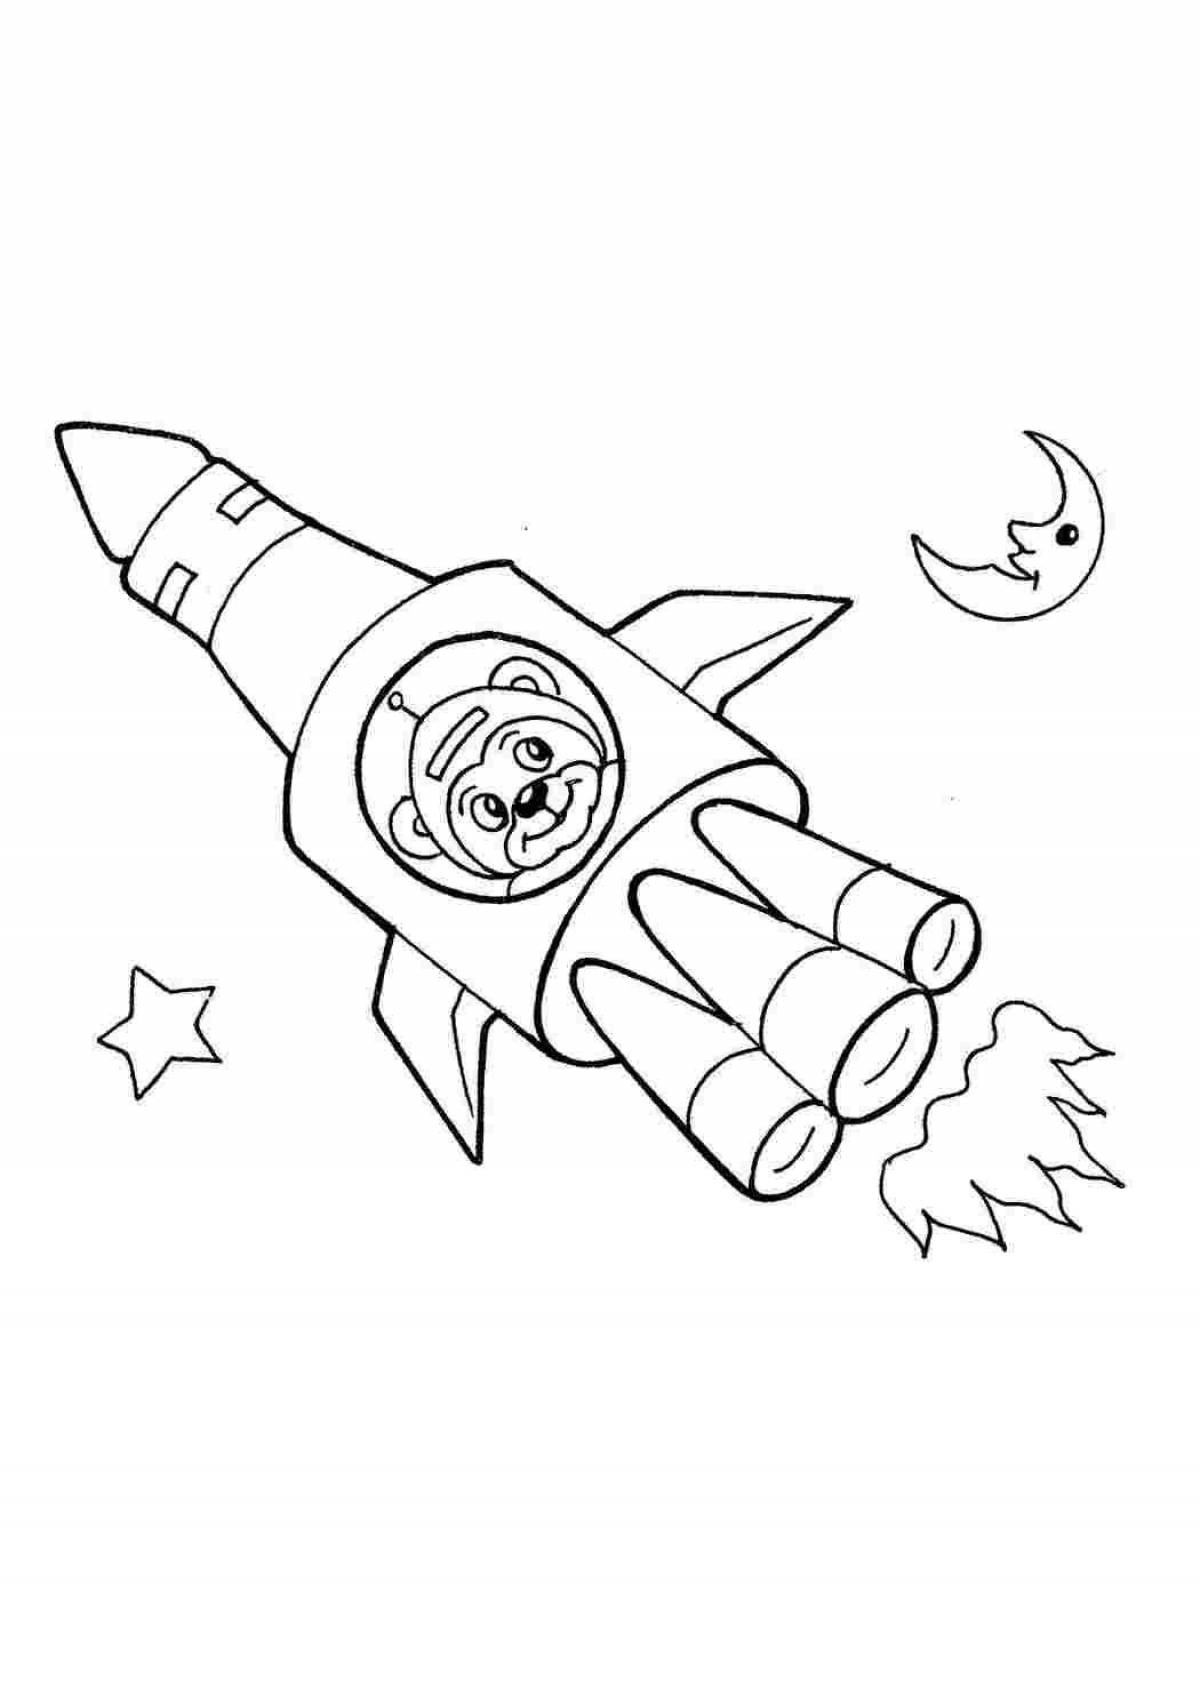 Rocket bright coloring for boys